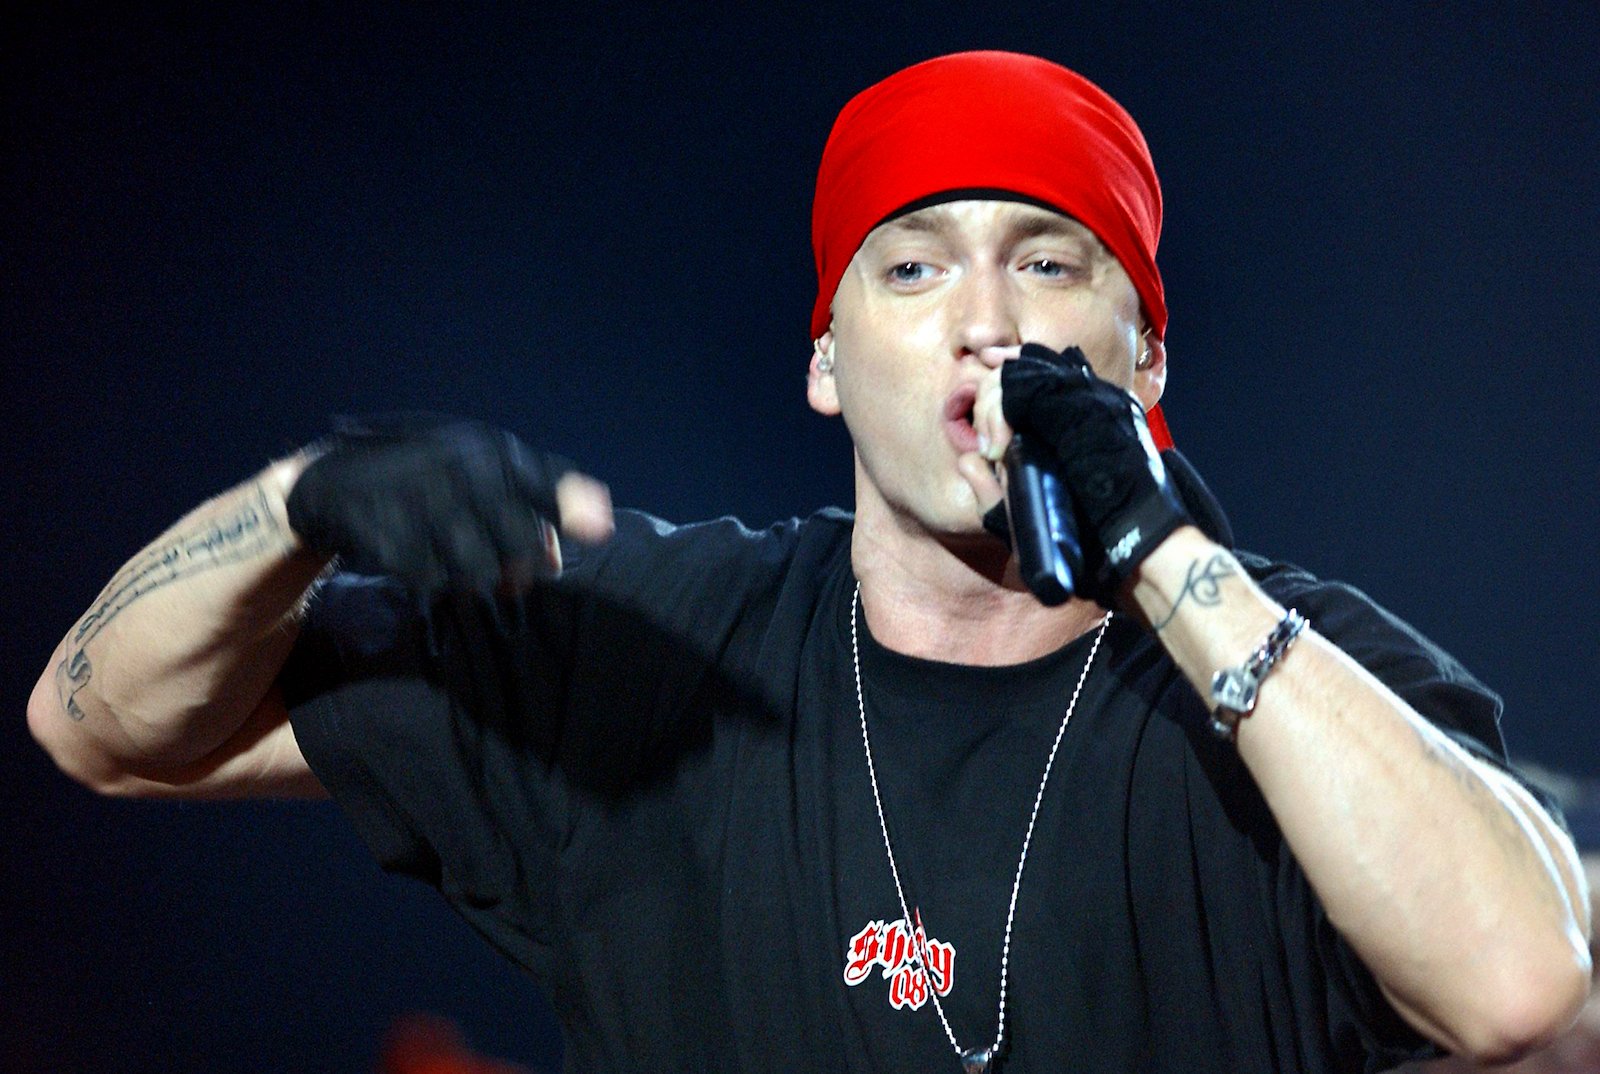 Eminem performing in 2004, the year he released his album 'Encore